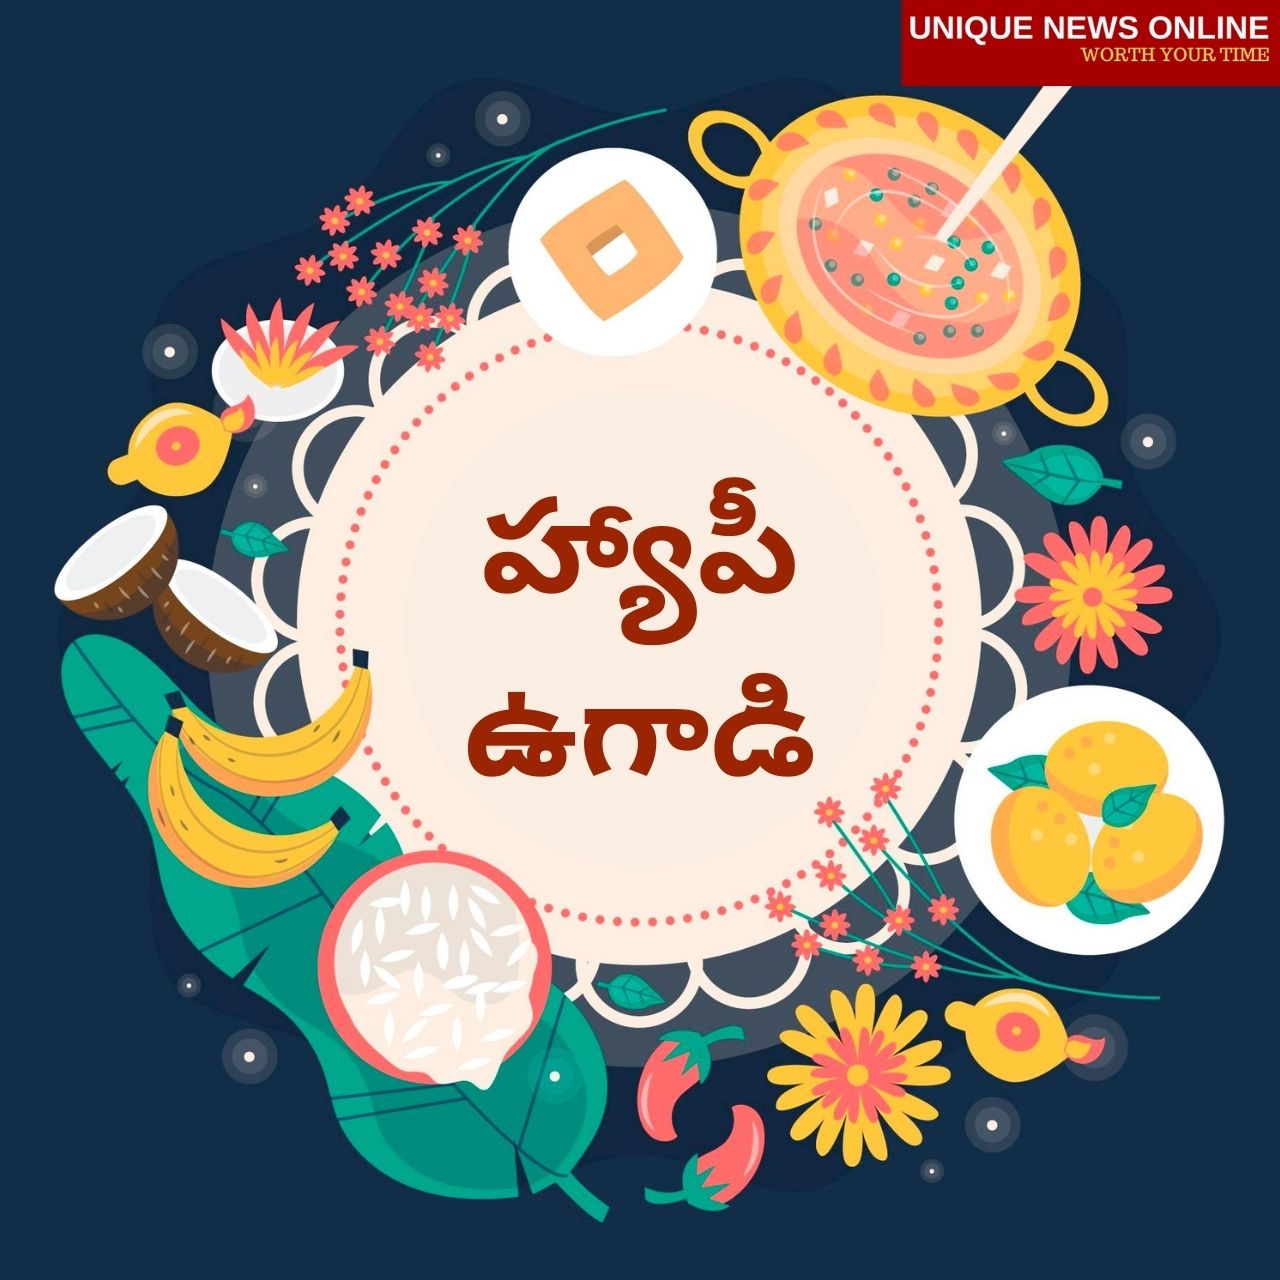 Happy Ugadi 2021 Wishes in Telugu, Images, Greetings, Quotes, and Messages to Share on Telugu, and Kannada New Year